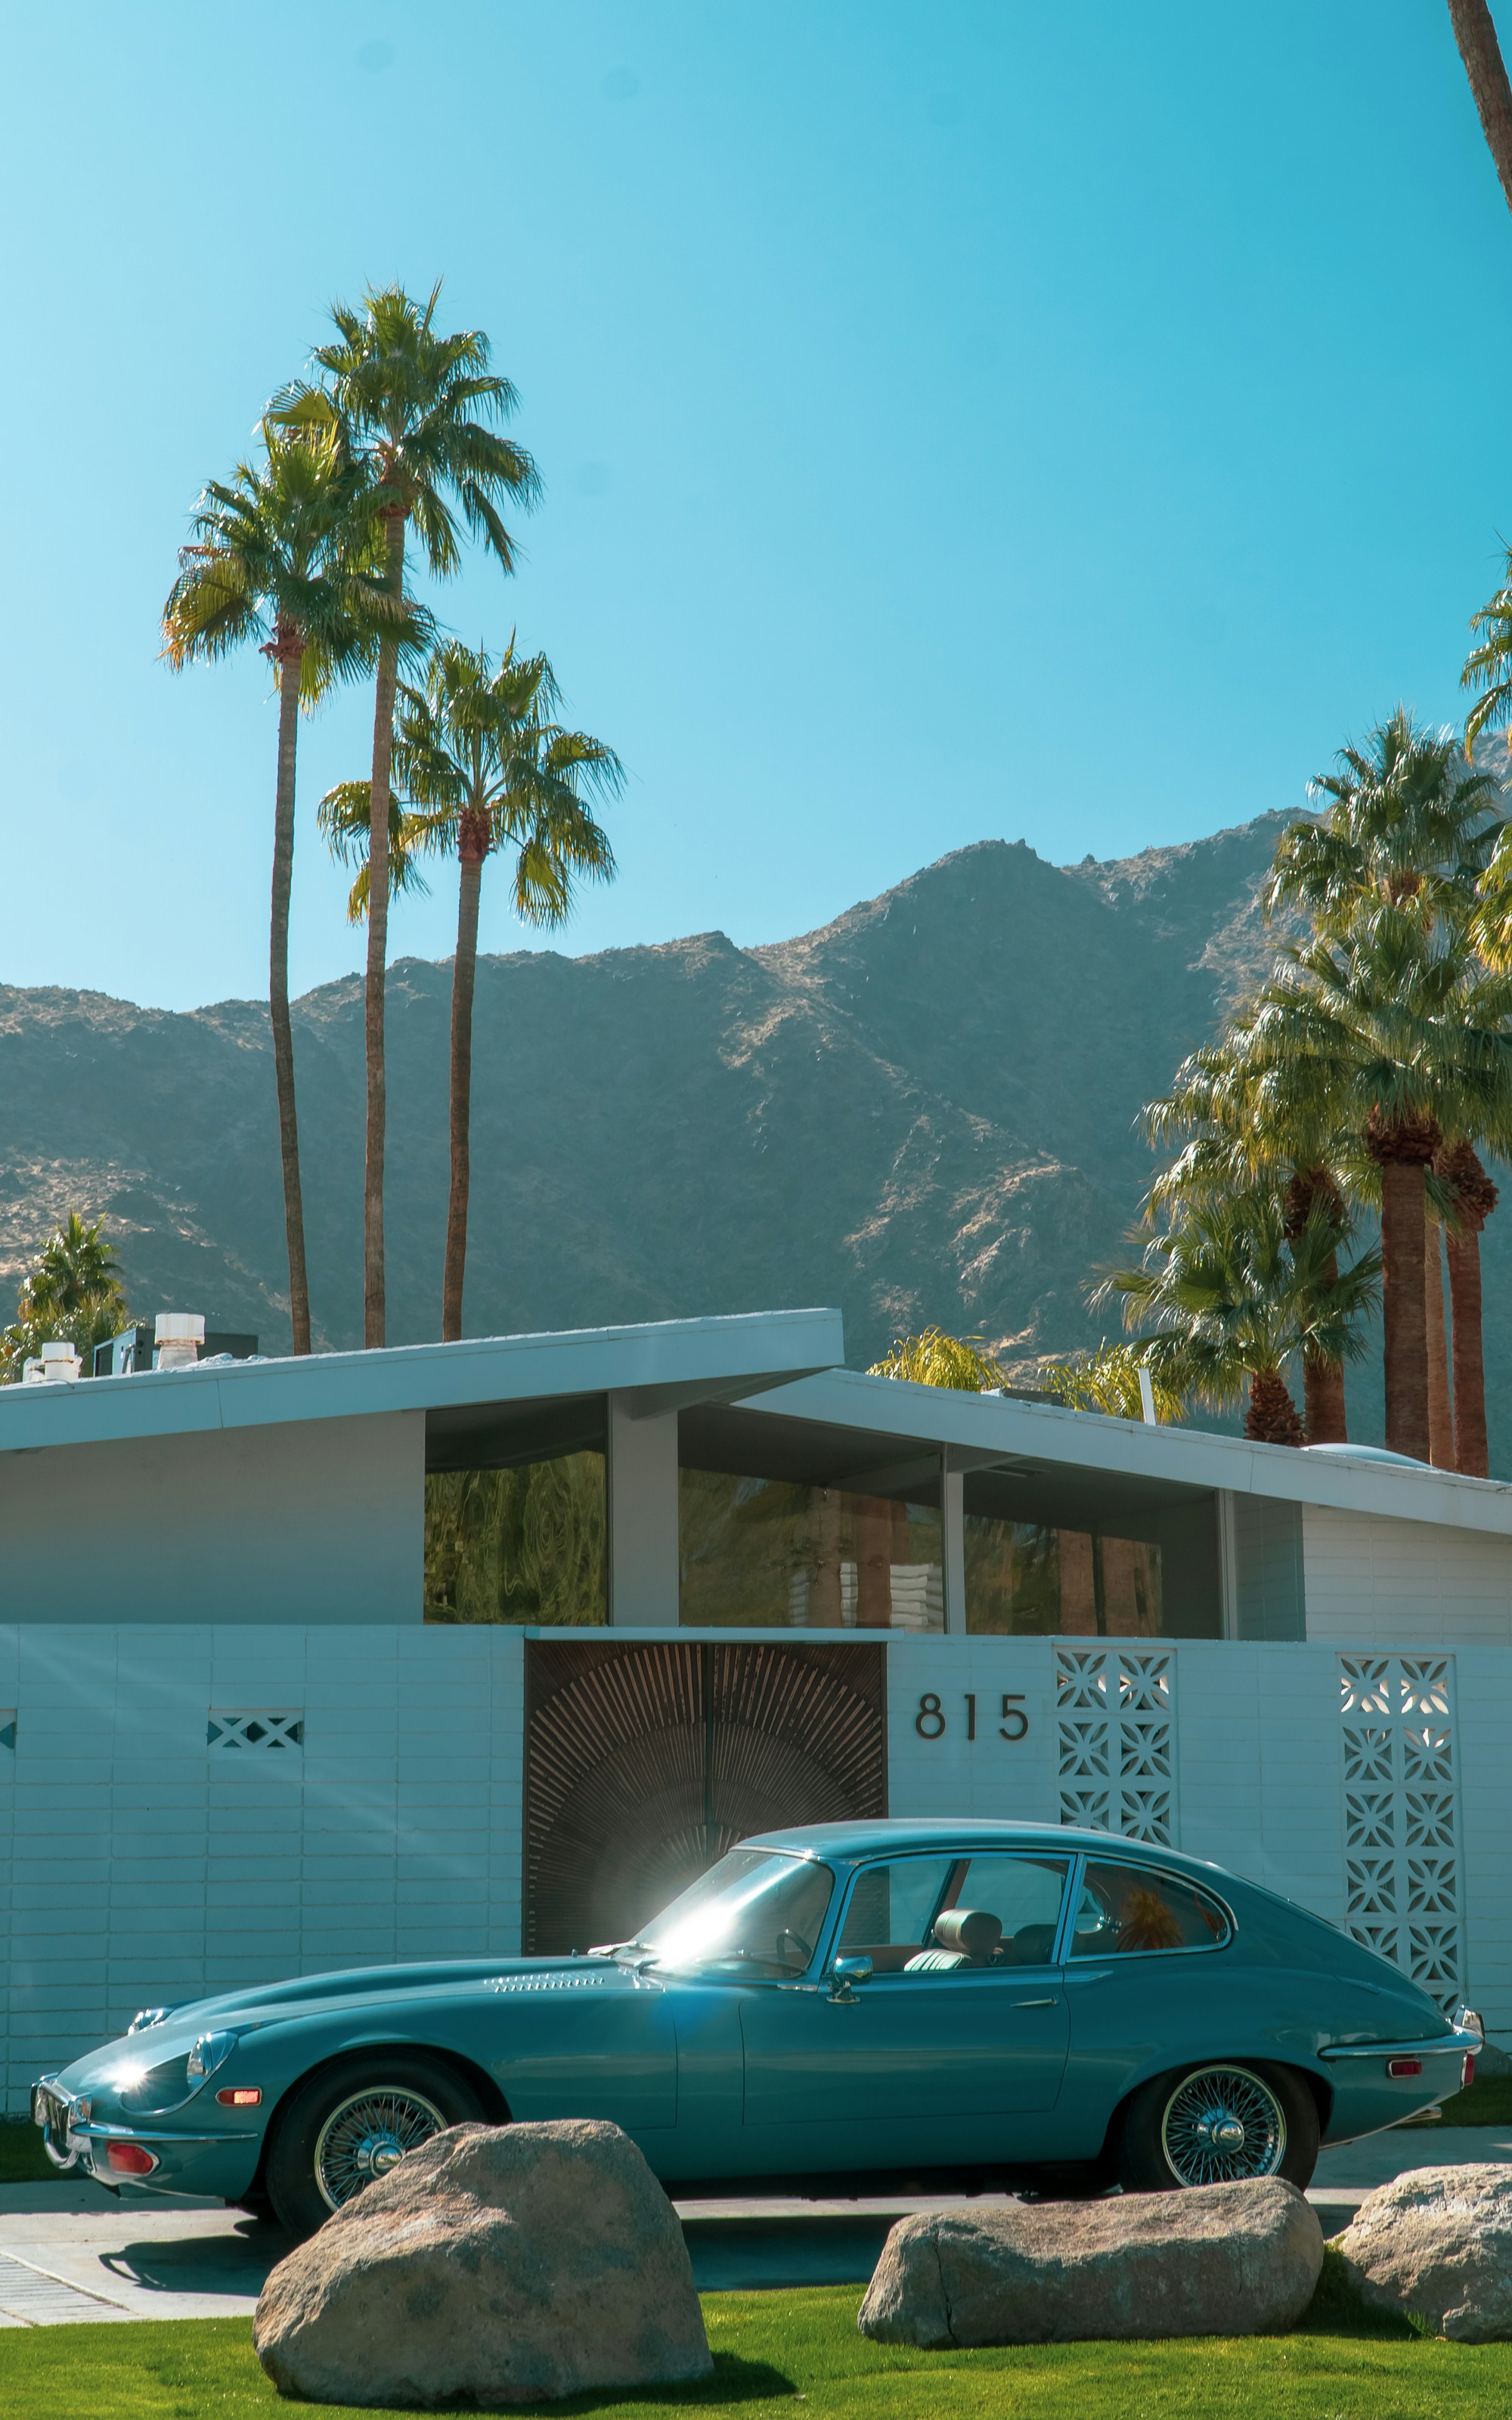 What to See in Palm Springs: Travel Guide